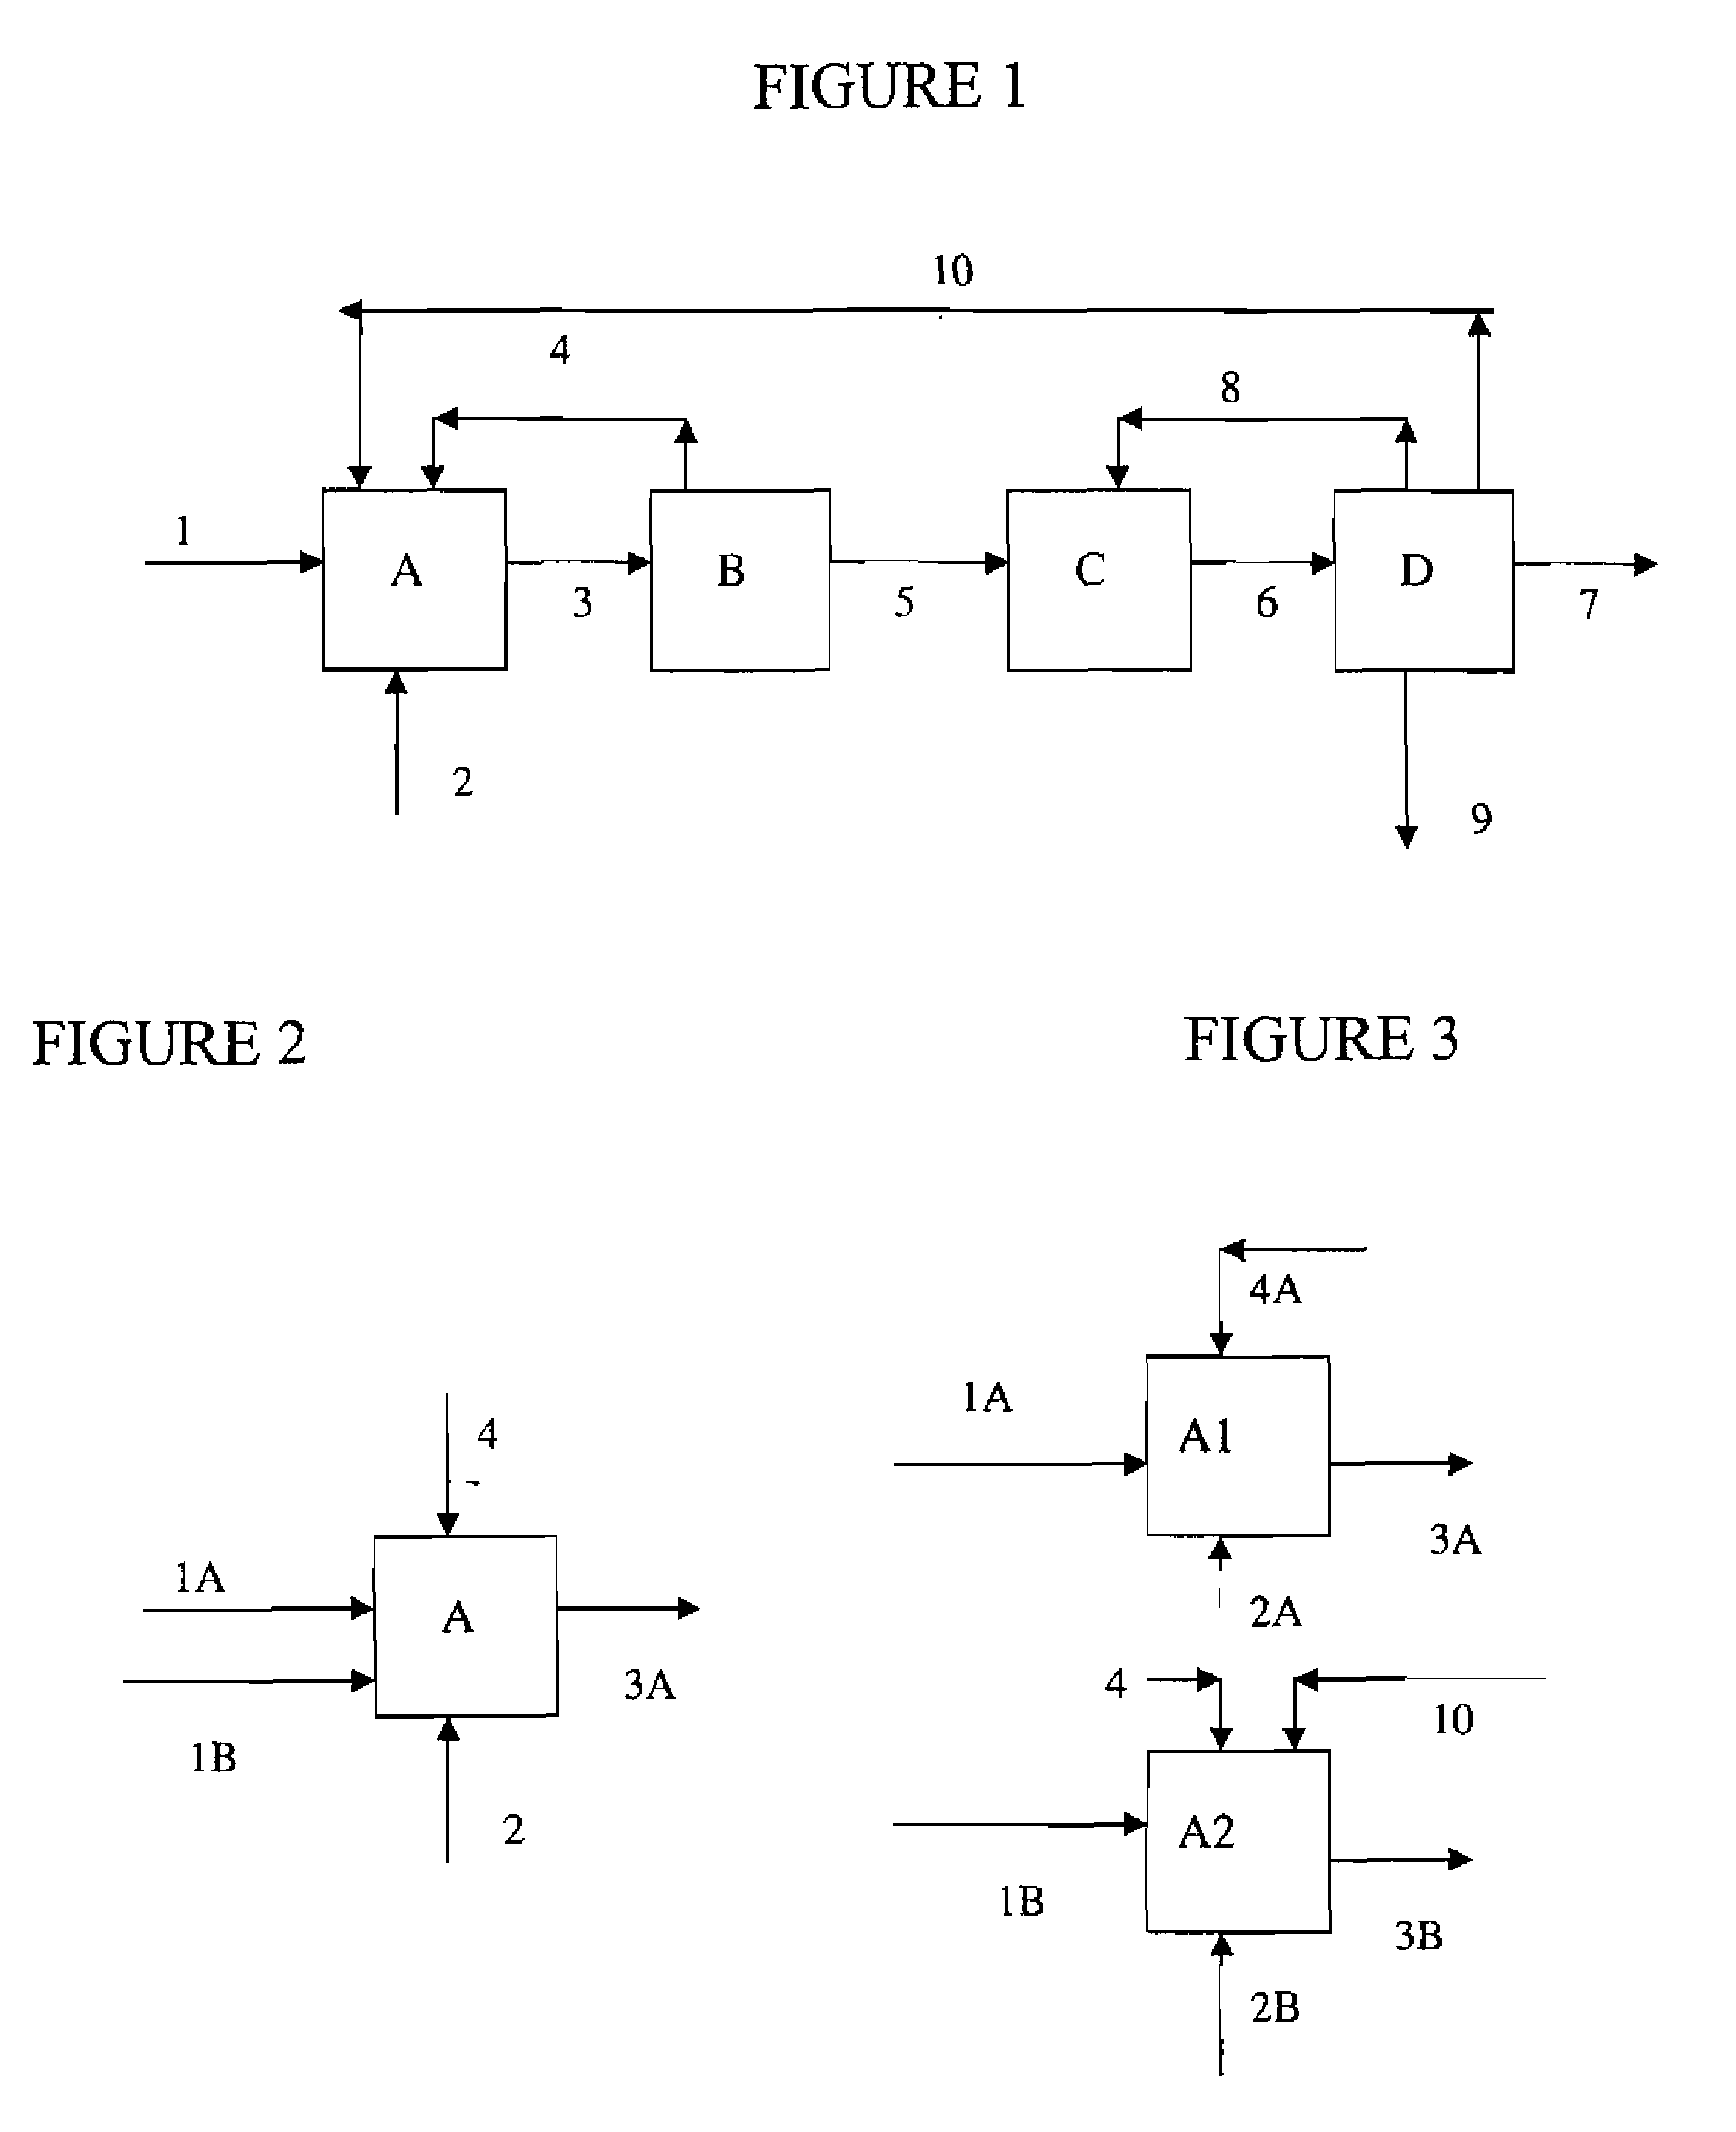 Process for the manufacture of fluorinated olefins